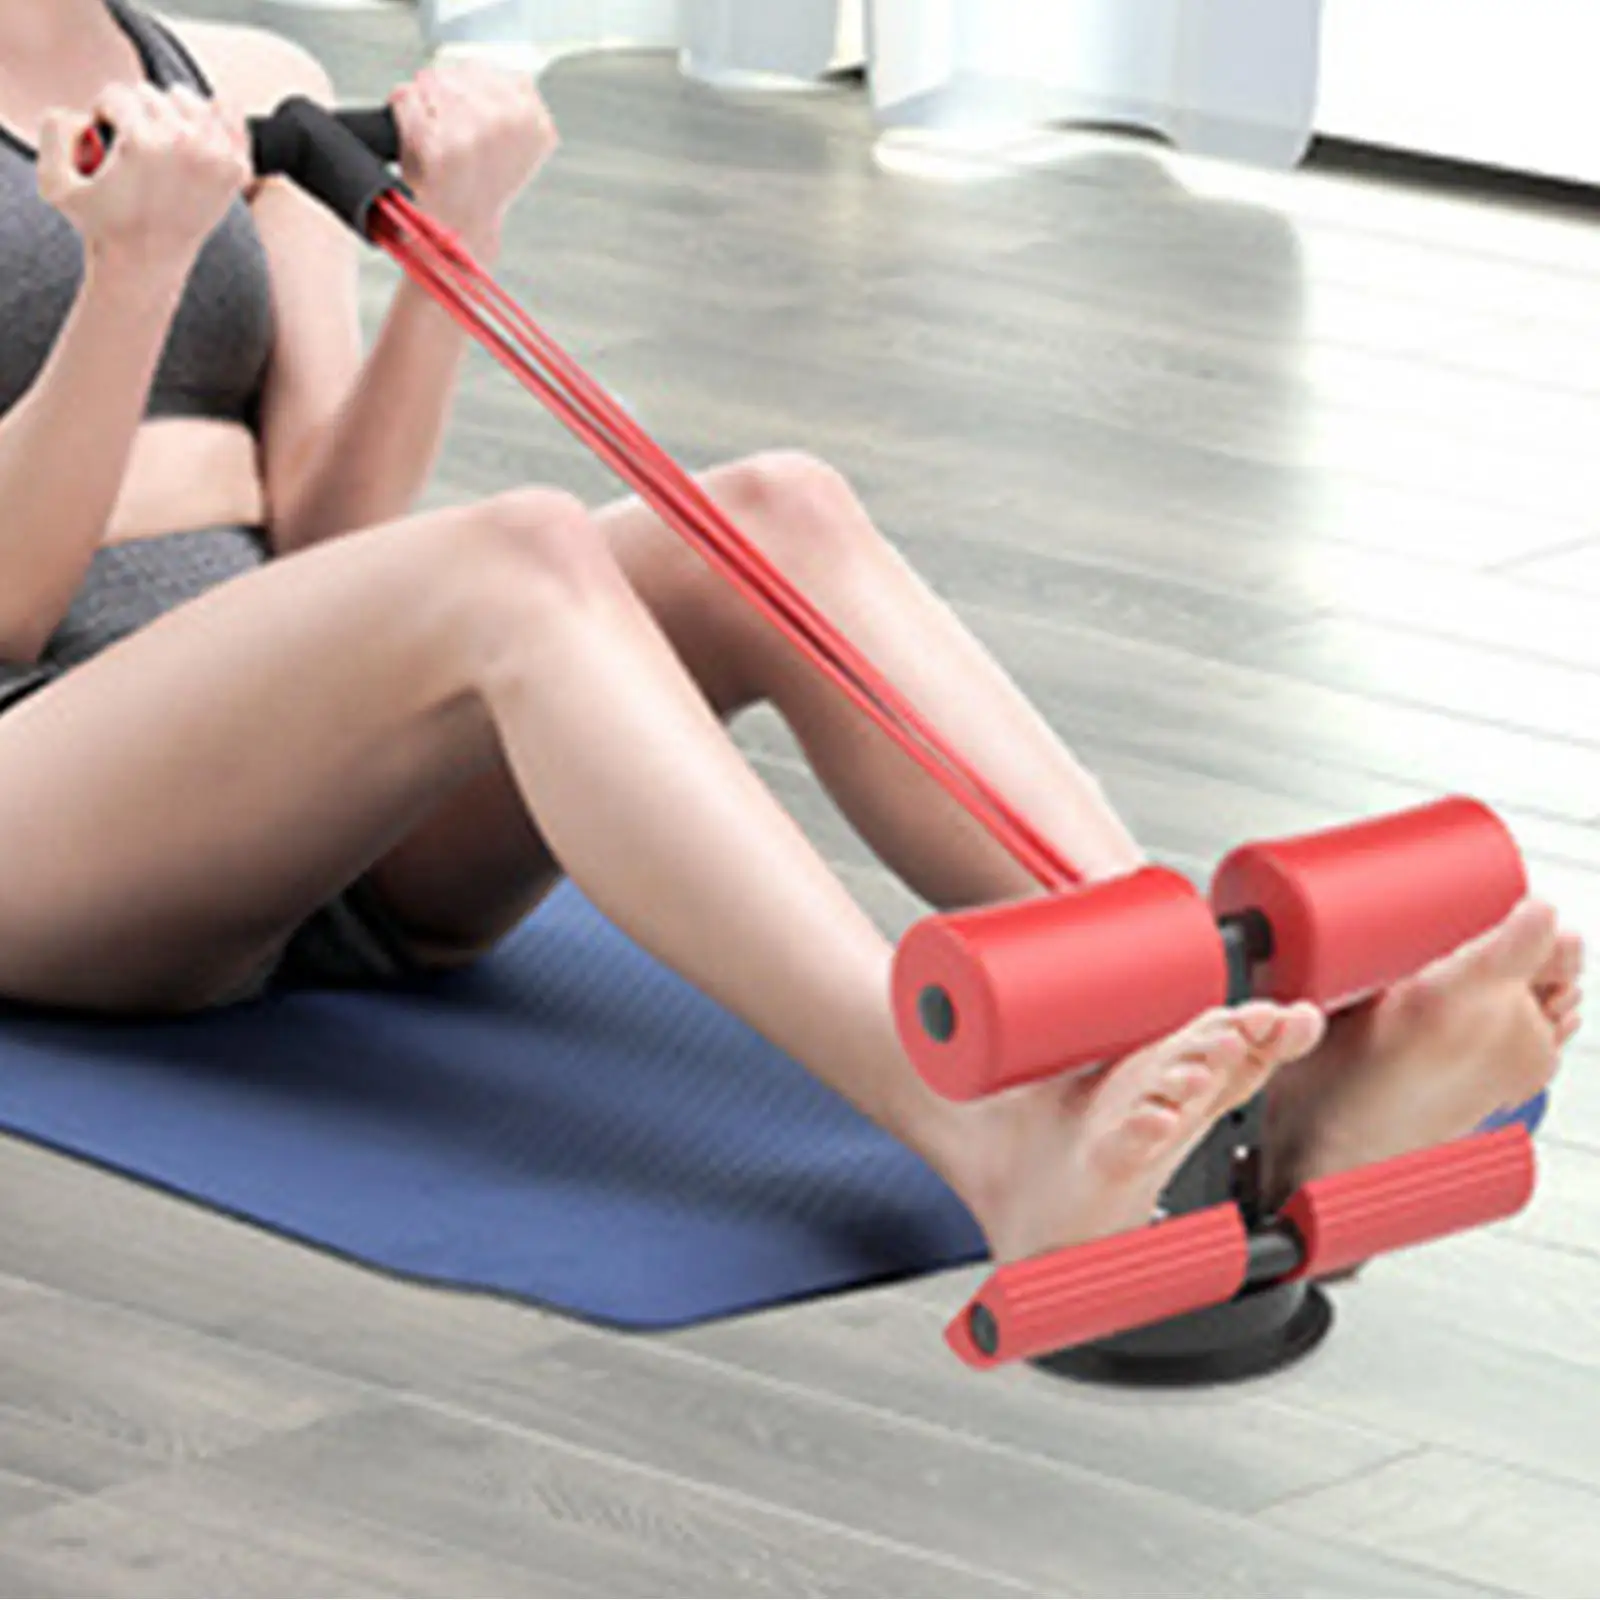  Support Fittings Aids Machine Sit up Rack for Fitness Workout Travel